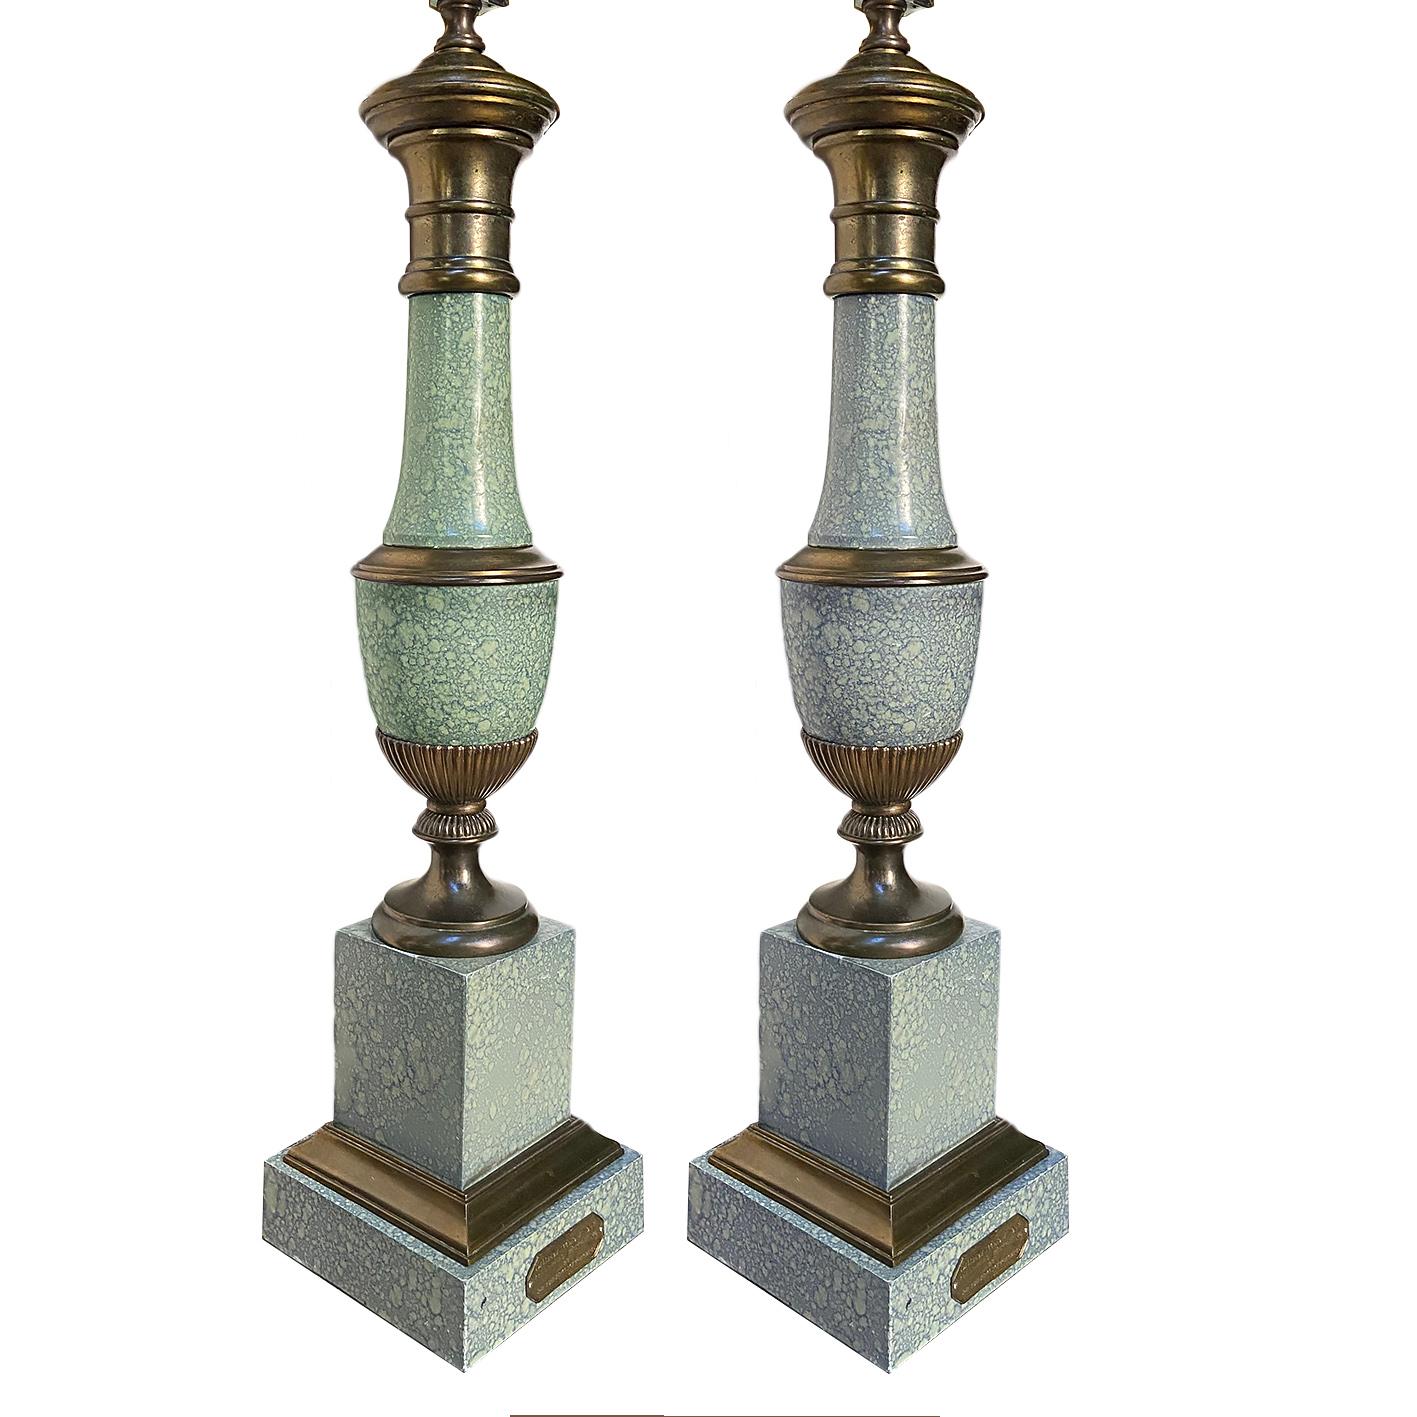 Pair of circa 1930's French painted tole lamps with brass details.

Measurements. 
Height of body: 23